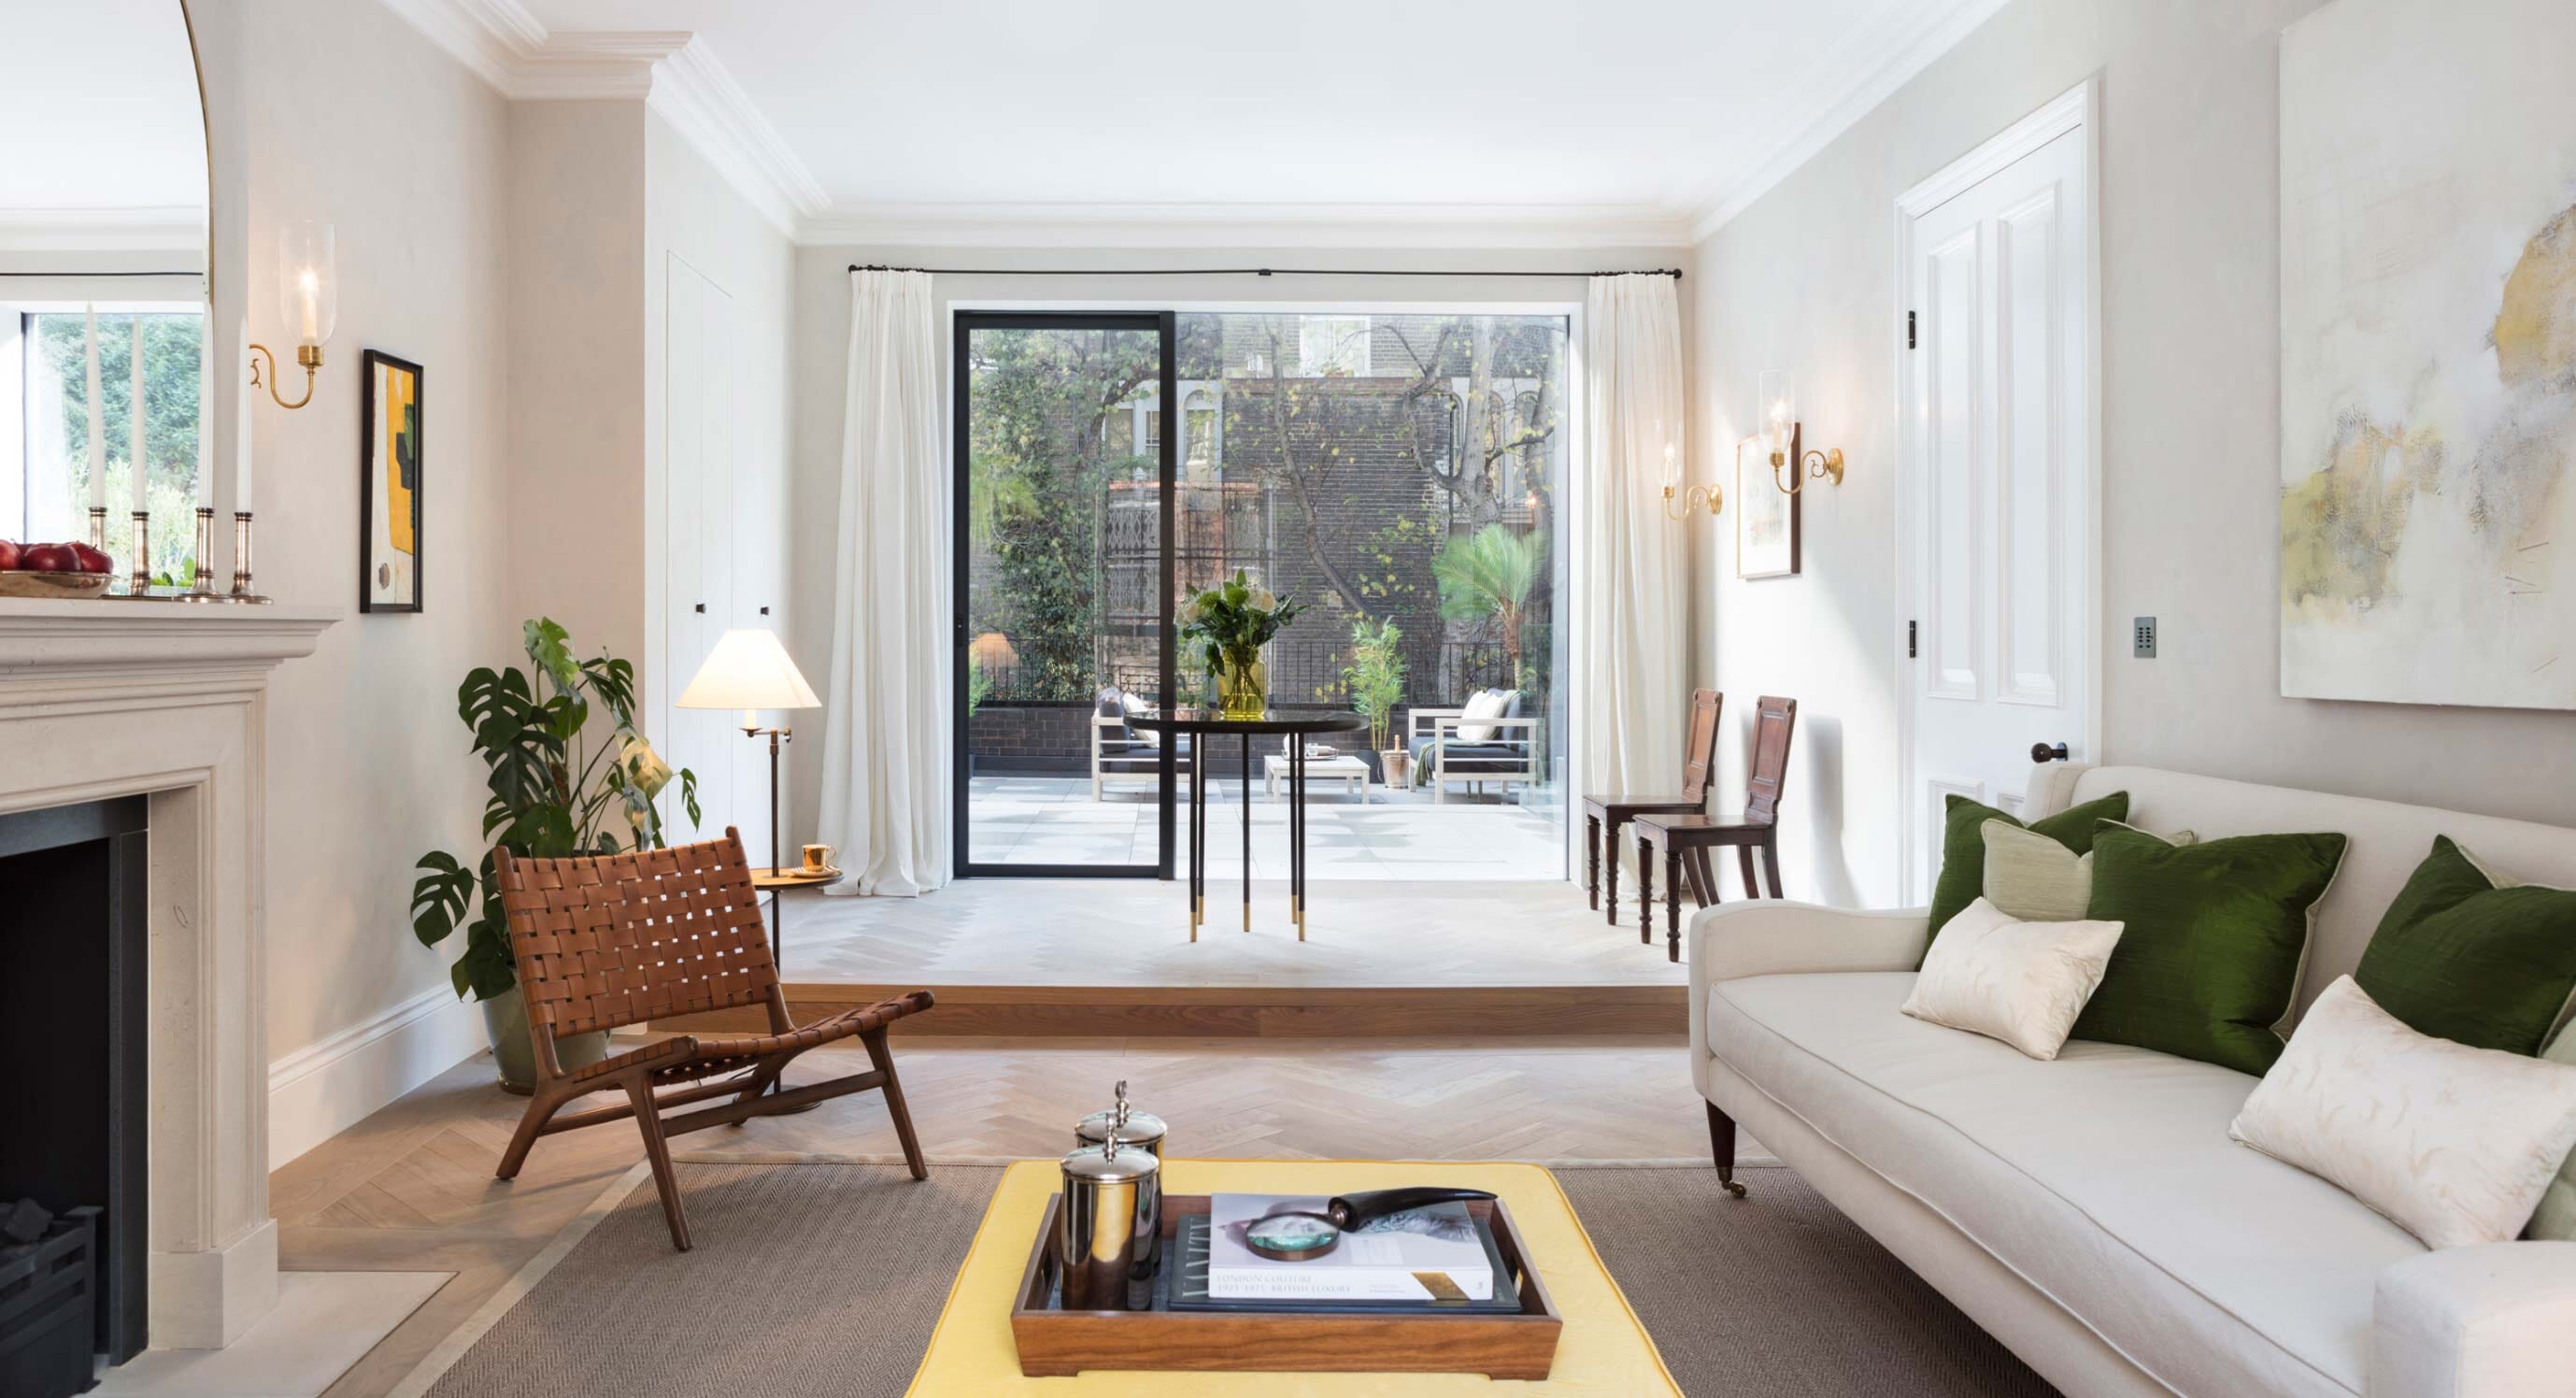 A Sanctuary In The City: The Leverton House, Notting Hill, by Echlin